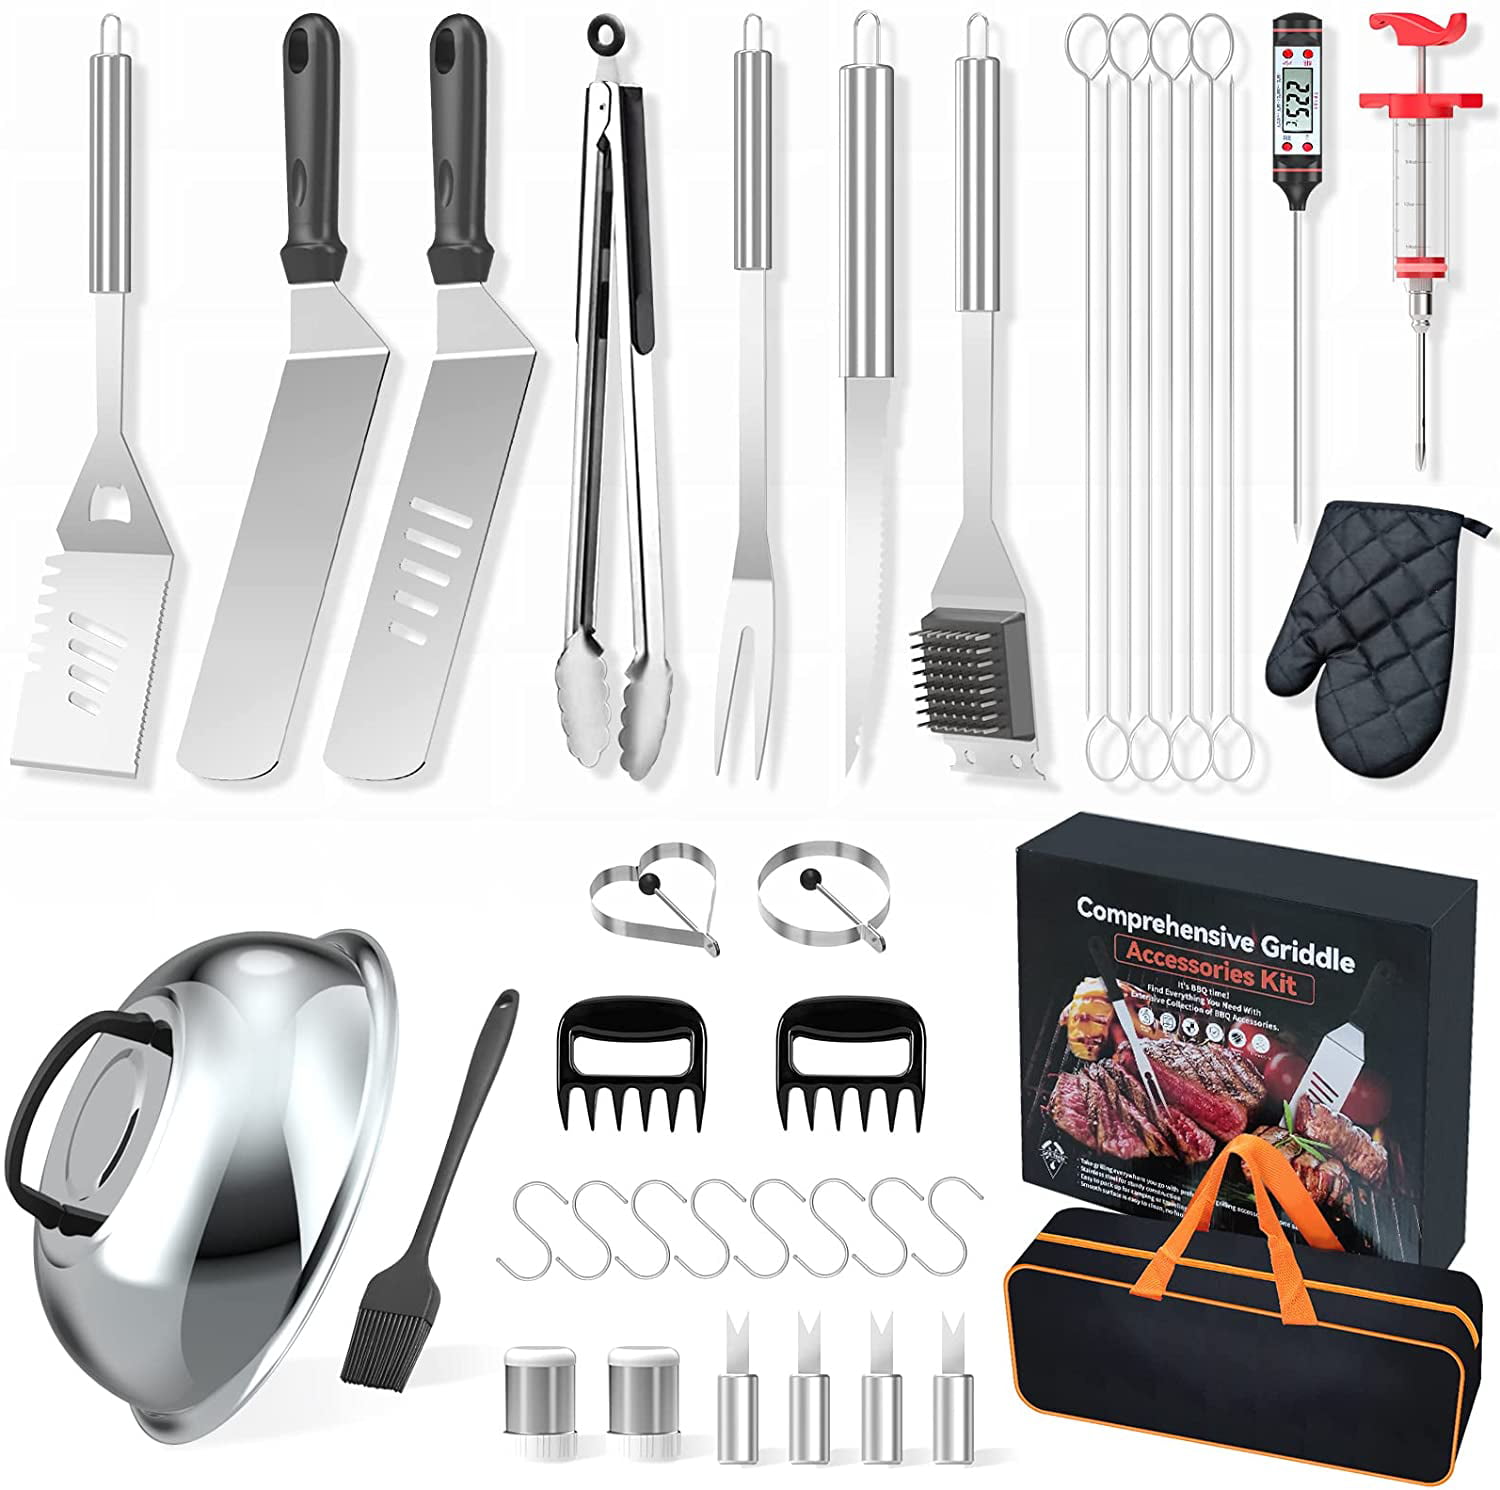 39PCS BBQ Grill Accessories Tools Set Stainless Steel Grilling Barbecue Case NEW 